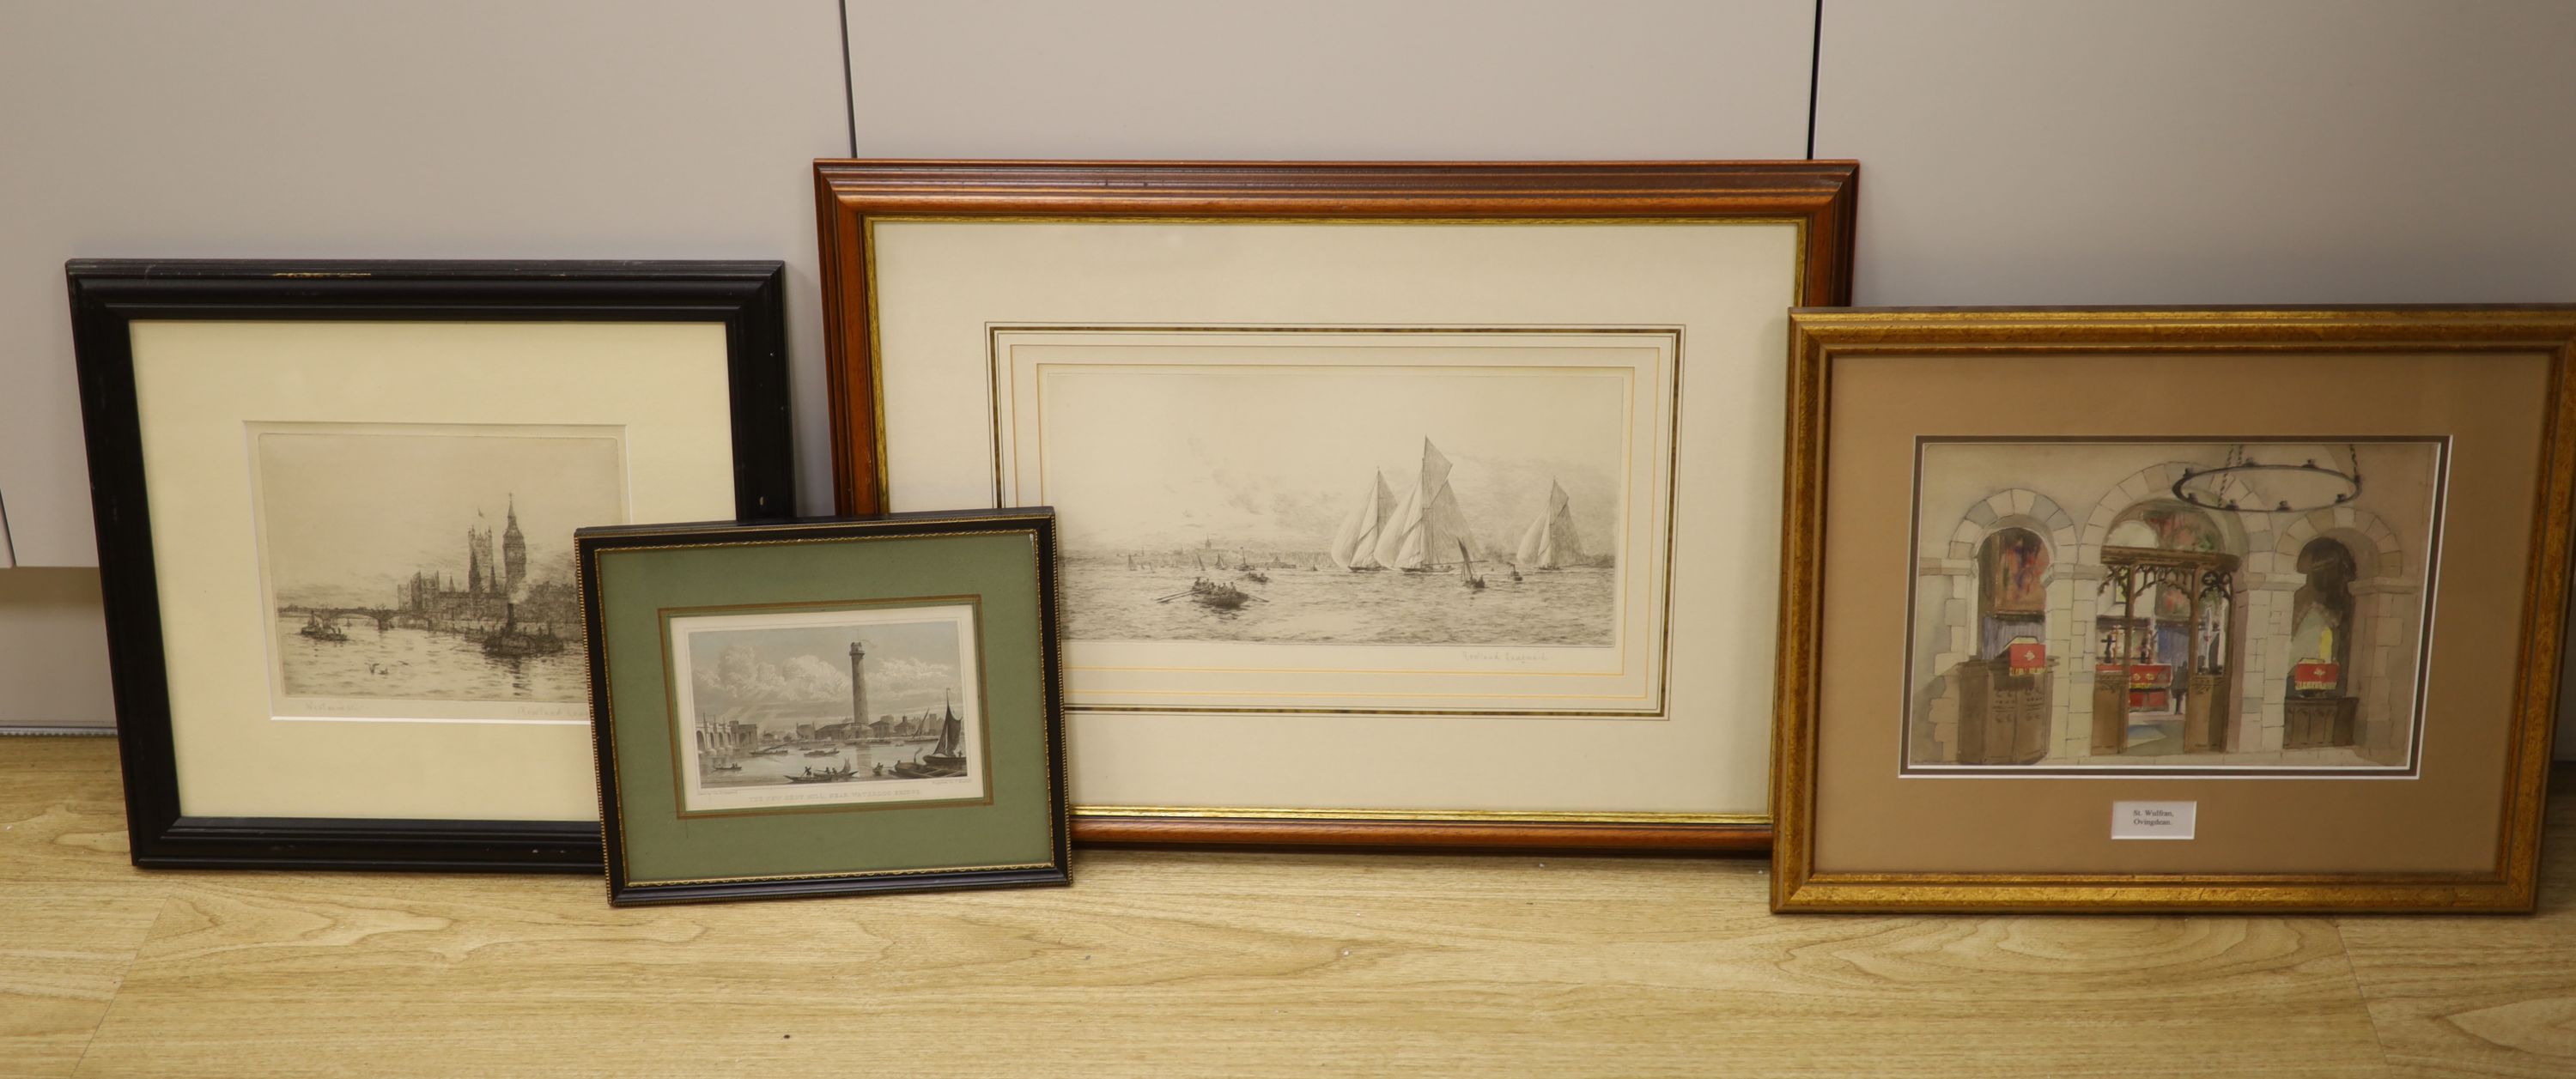 Rowland Langmaid (1897-1956), etching, Yachts and other vessels off the coast, signed in pencil, 15.5 x 30cm, another etching of Westminster, and two other prints